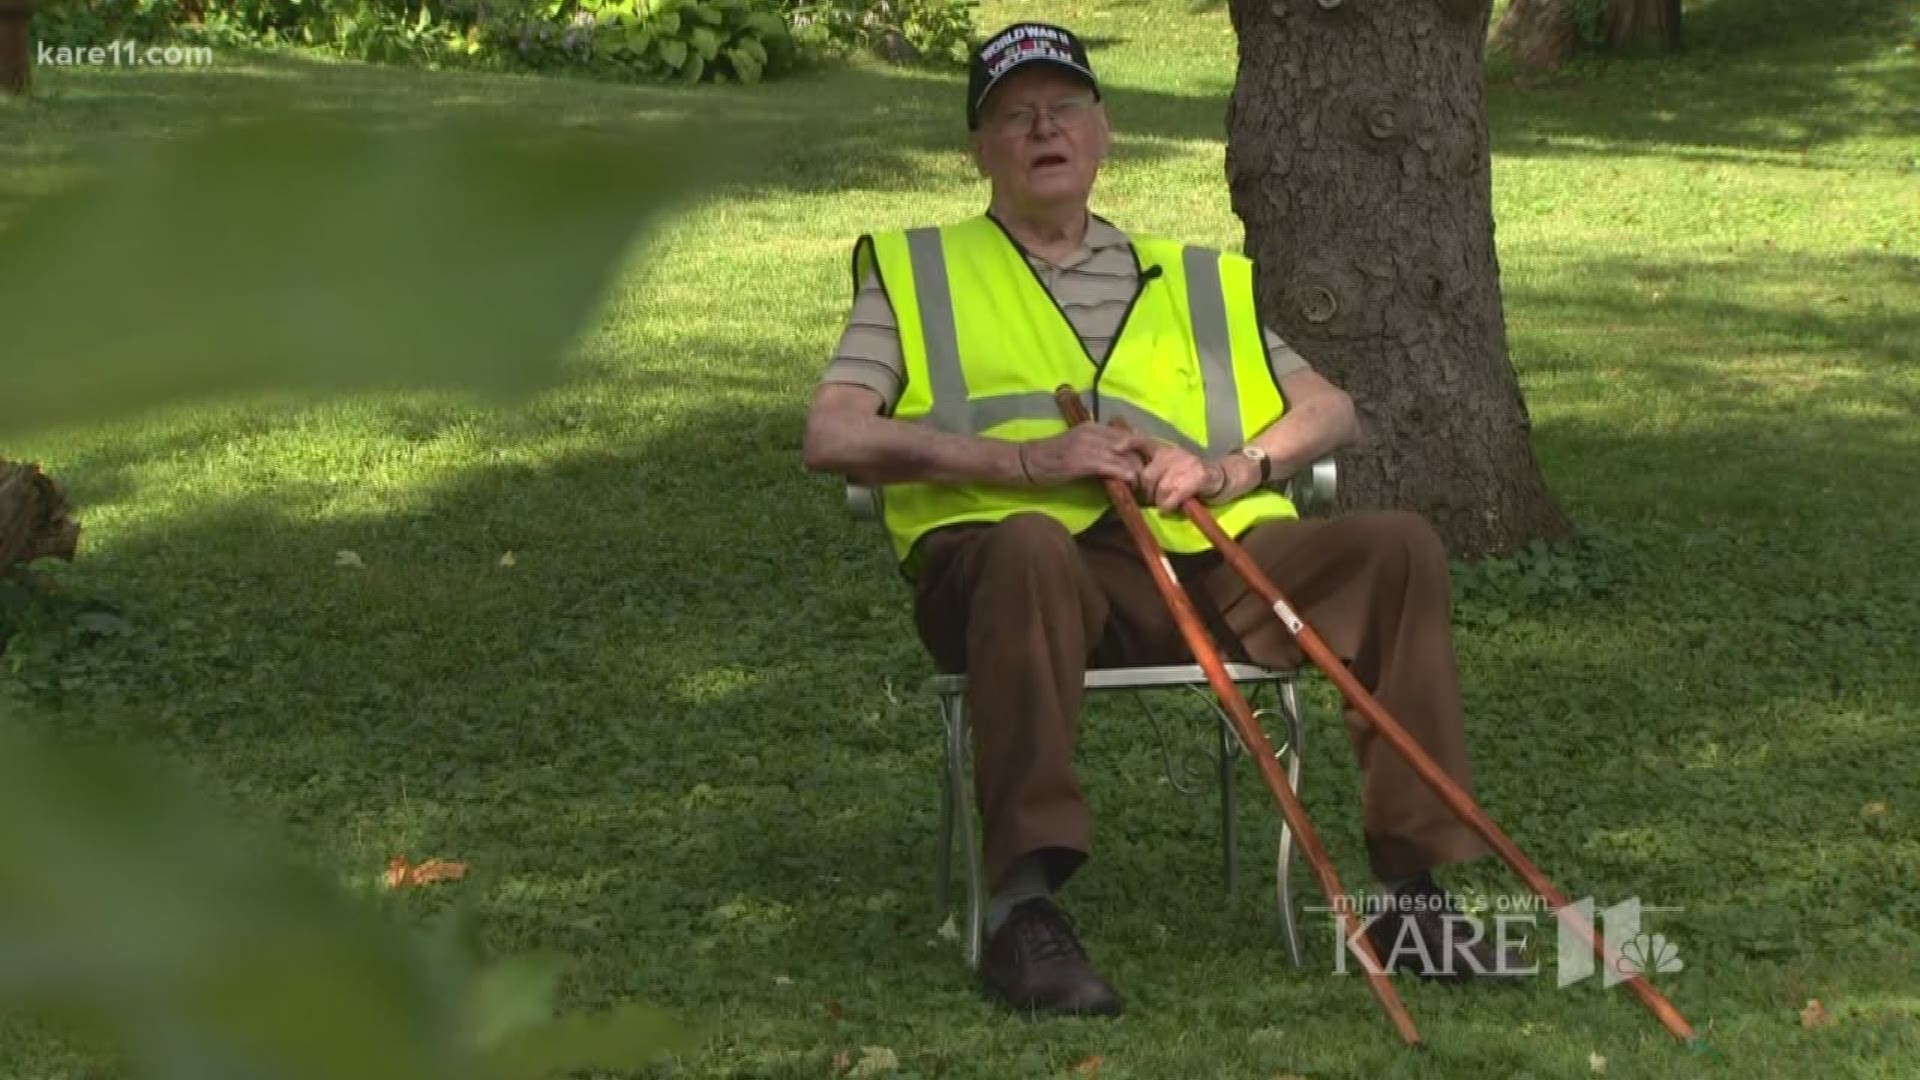 Every few hundred feet along Harvey's walk sits a seemingly random chair - some next to driveways, others on front lawns. http://kare11.tv/2zfz19B